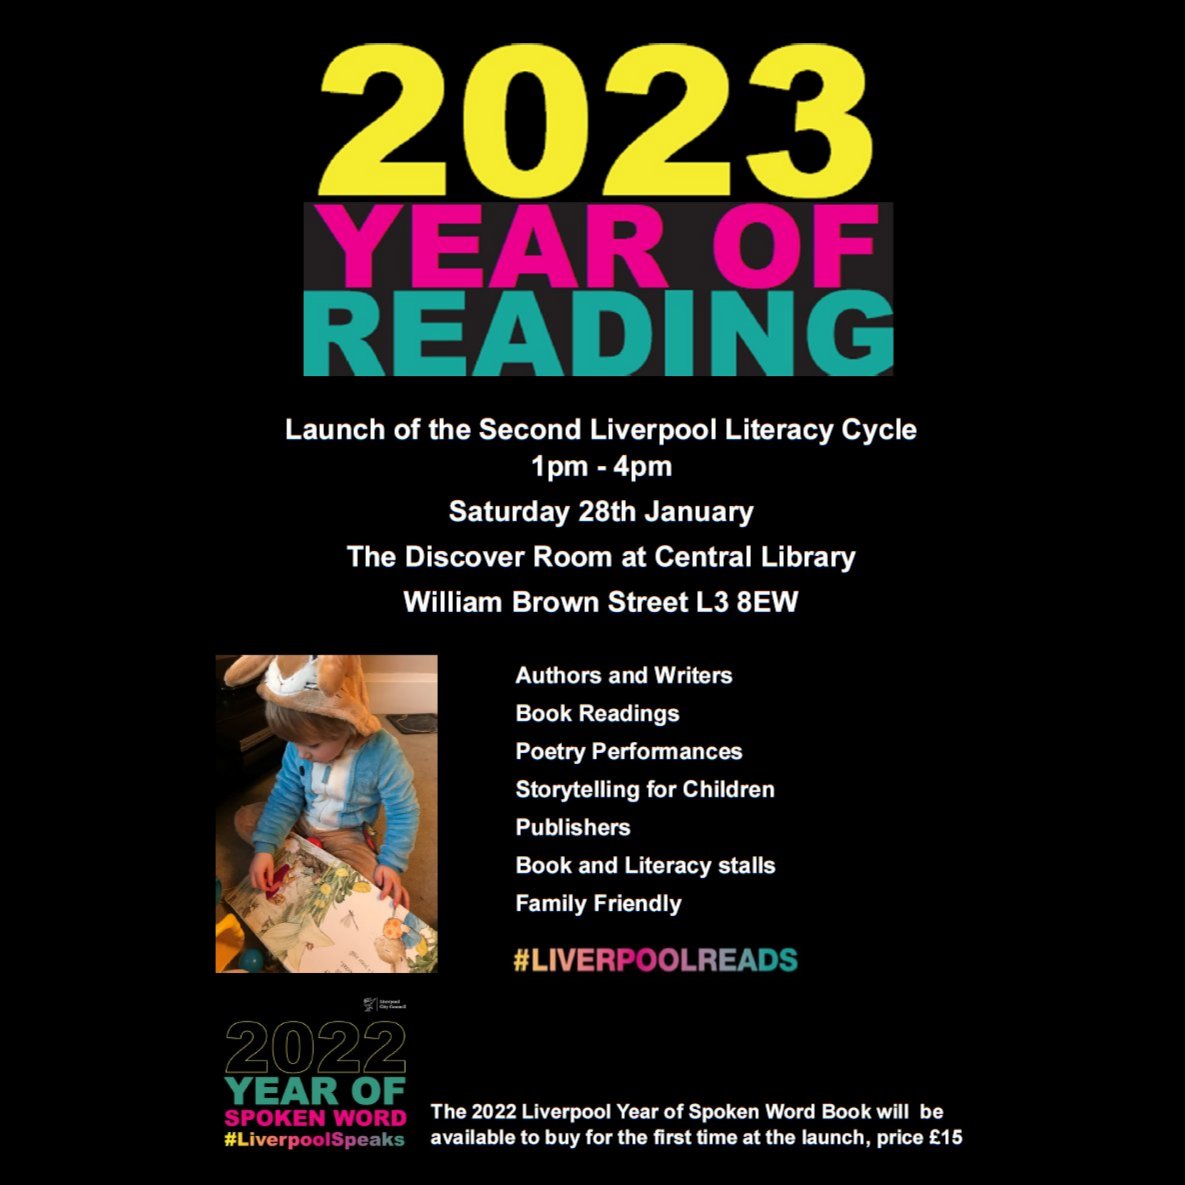 Excited for the launch of Liverpool Year of Reading this Sat at @Lpoolcentlib 1-4.30pm. A free family event with fantastic activities/performances!

@LivLitCycle book celebrating the Year of Spoken Word will be available to buy!   

#LiverpoolReads #LivLitCycle #LiverpoolSpeaks